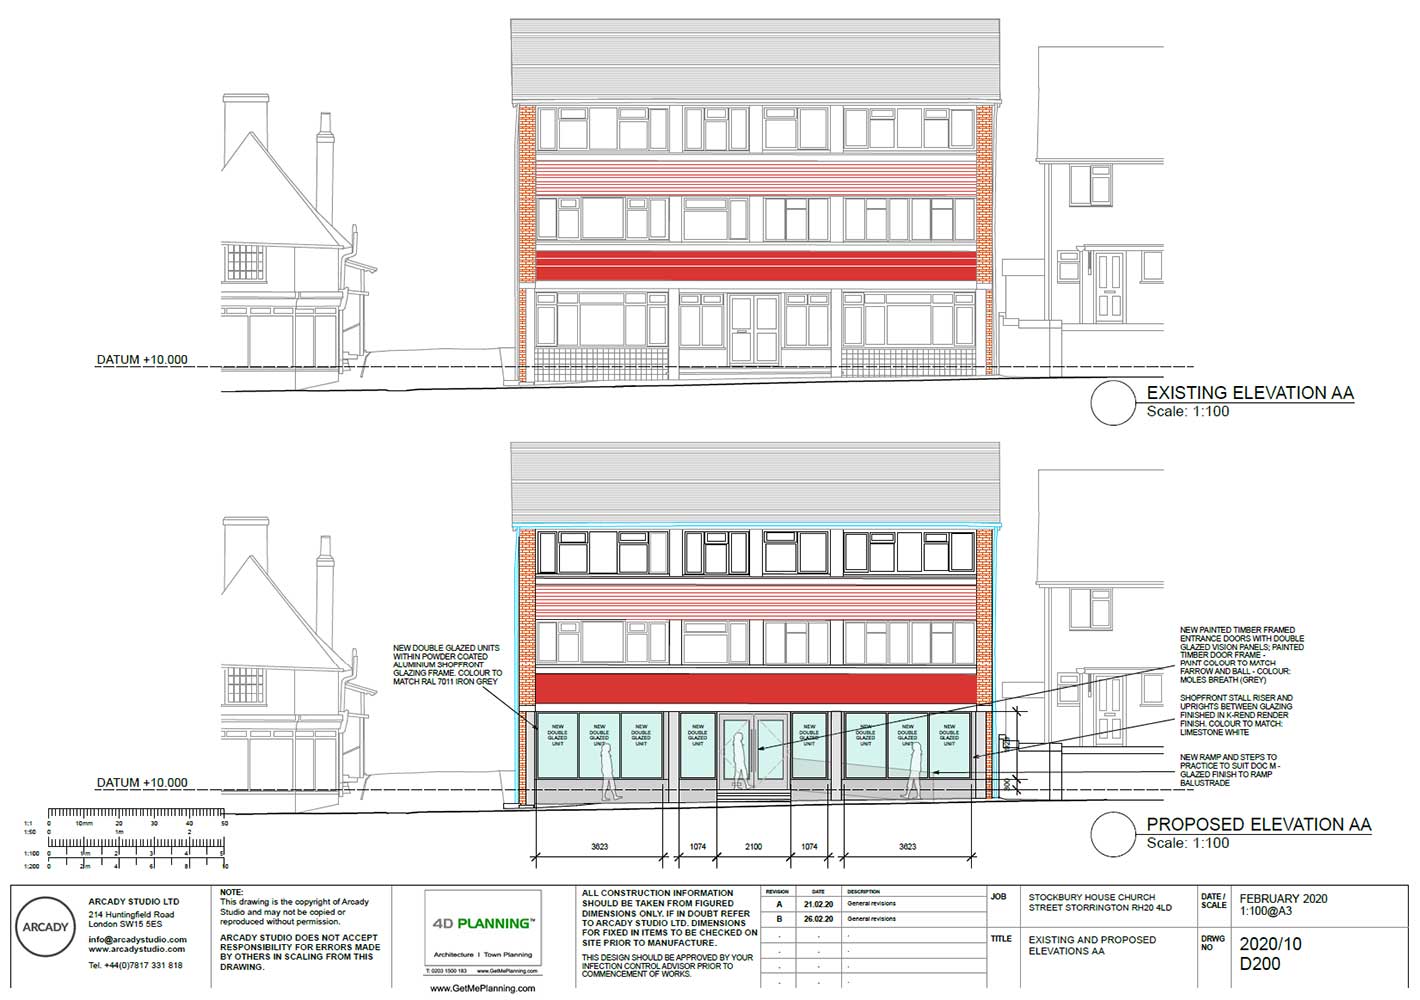 6-change-of-use-from-offices-B1a-to-a-dental-practice-D1-changes-to-fenestration-and-access-to-property-horsham-council